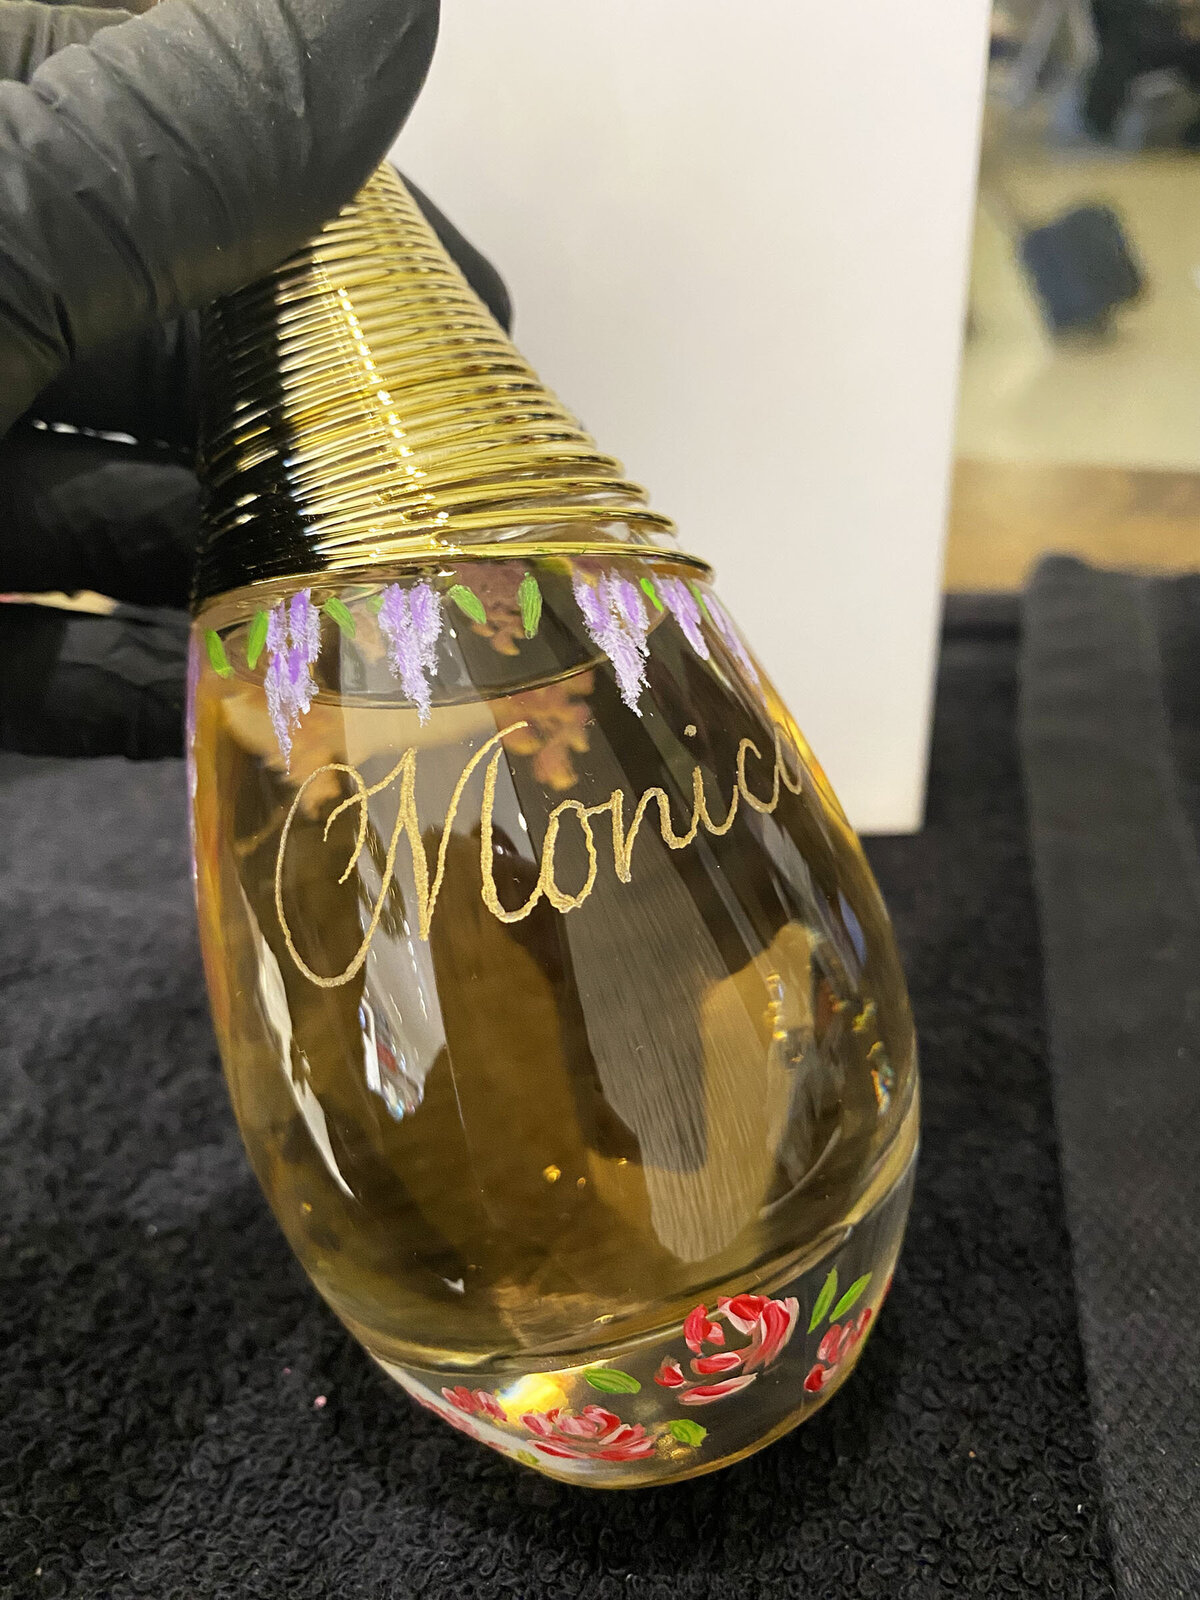 Dior Perfume Bottle Painted and Engraved Los Angeles LAX DFS